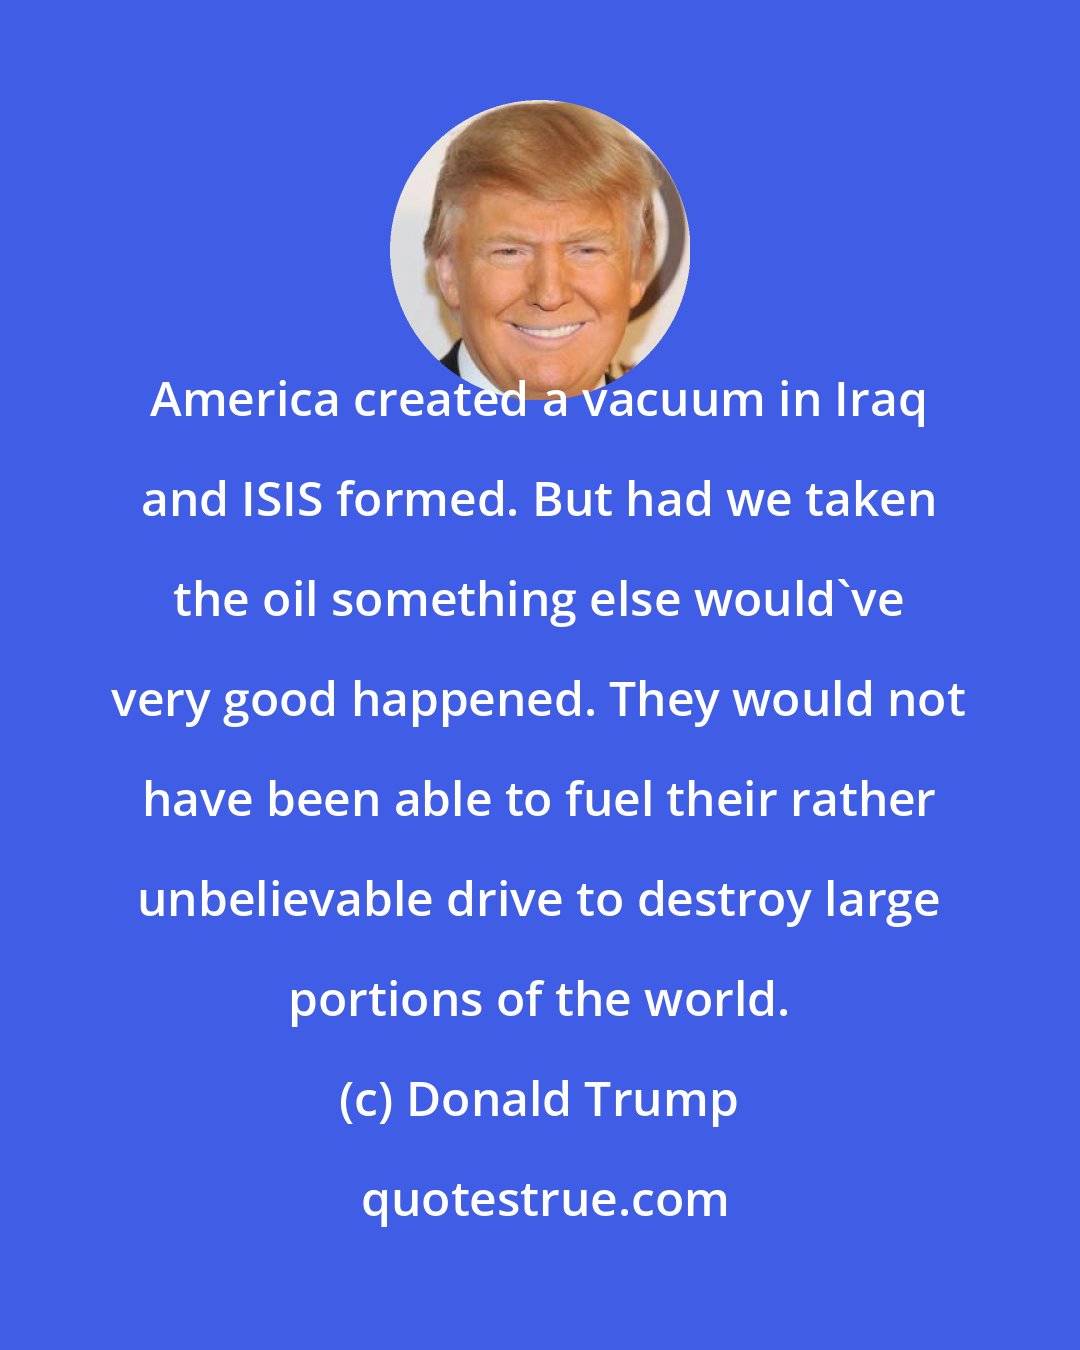 Donald Trump: America created a vacuum in Iraq and ISIS formed. But had we taken the oil something else would've very good happened. They would not have been able to fuel their rather unbelievable drive to destroy large portions of the world.